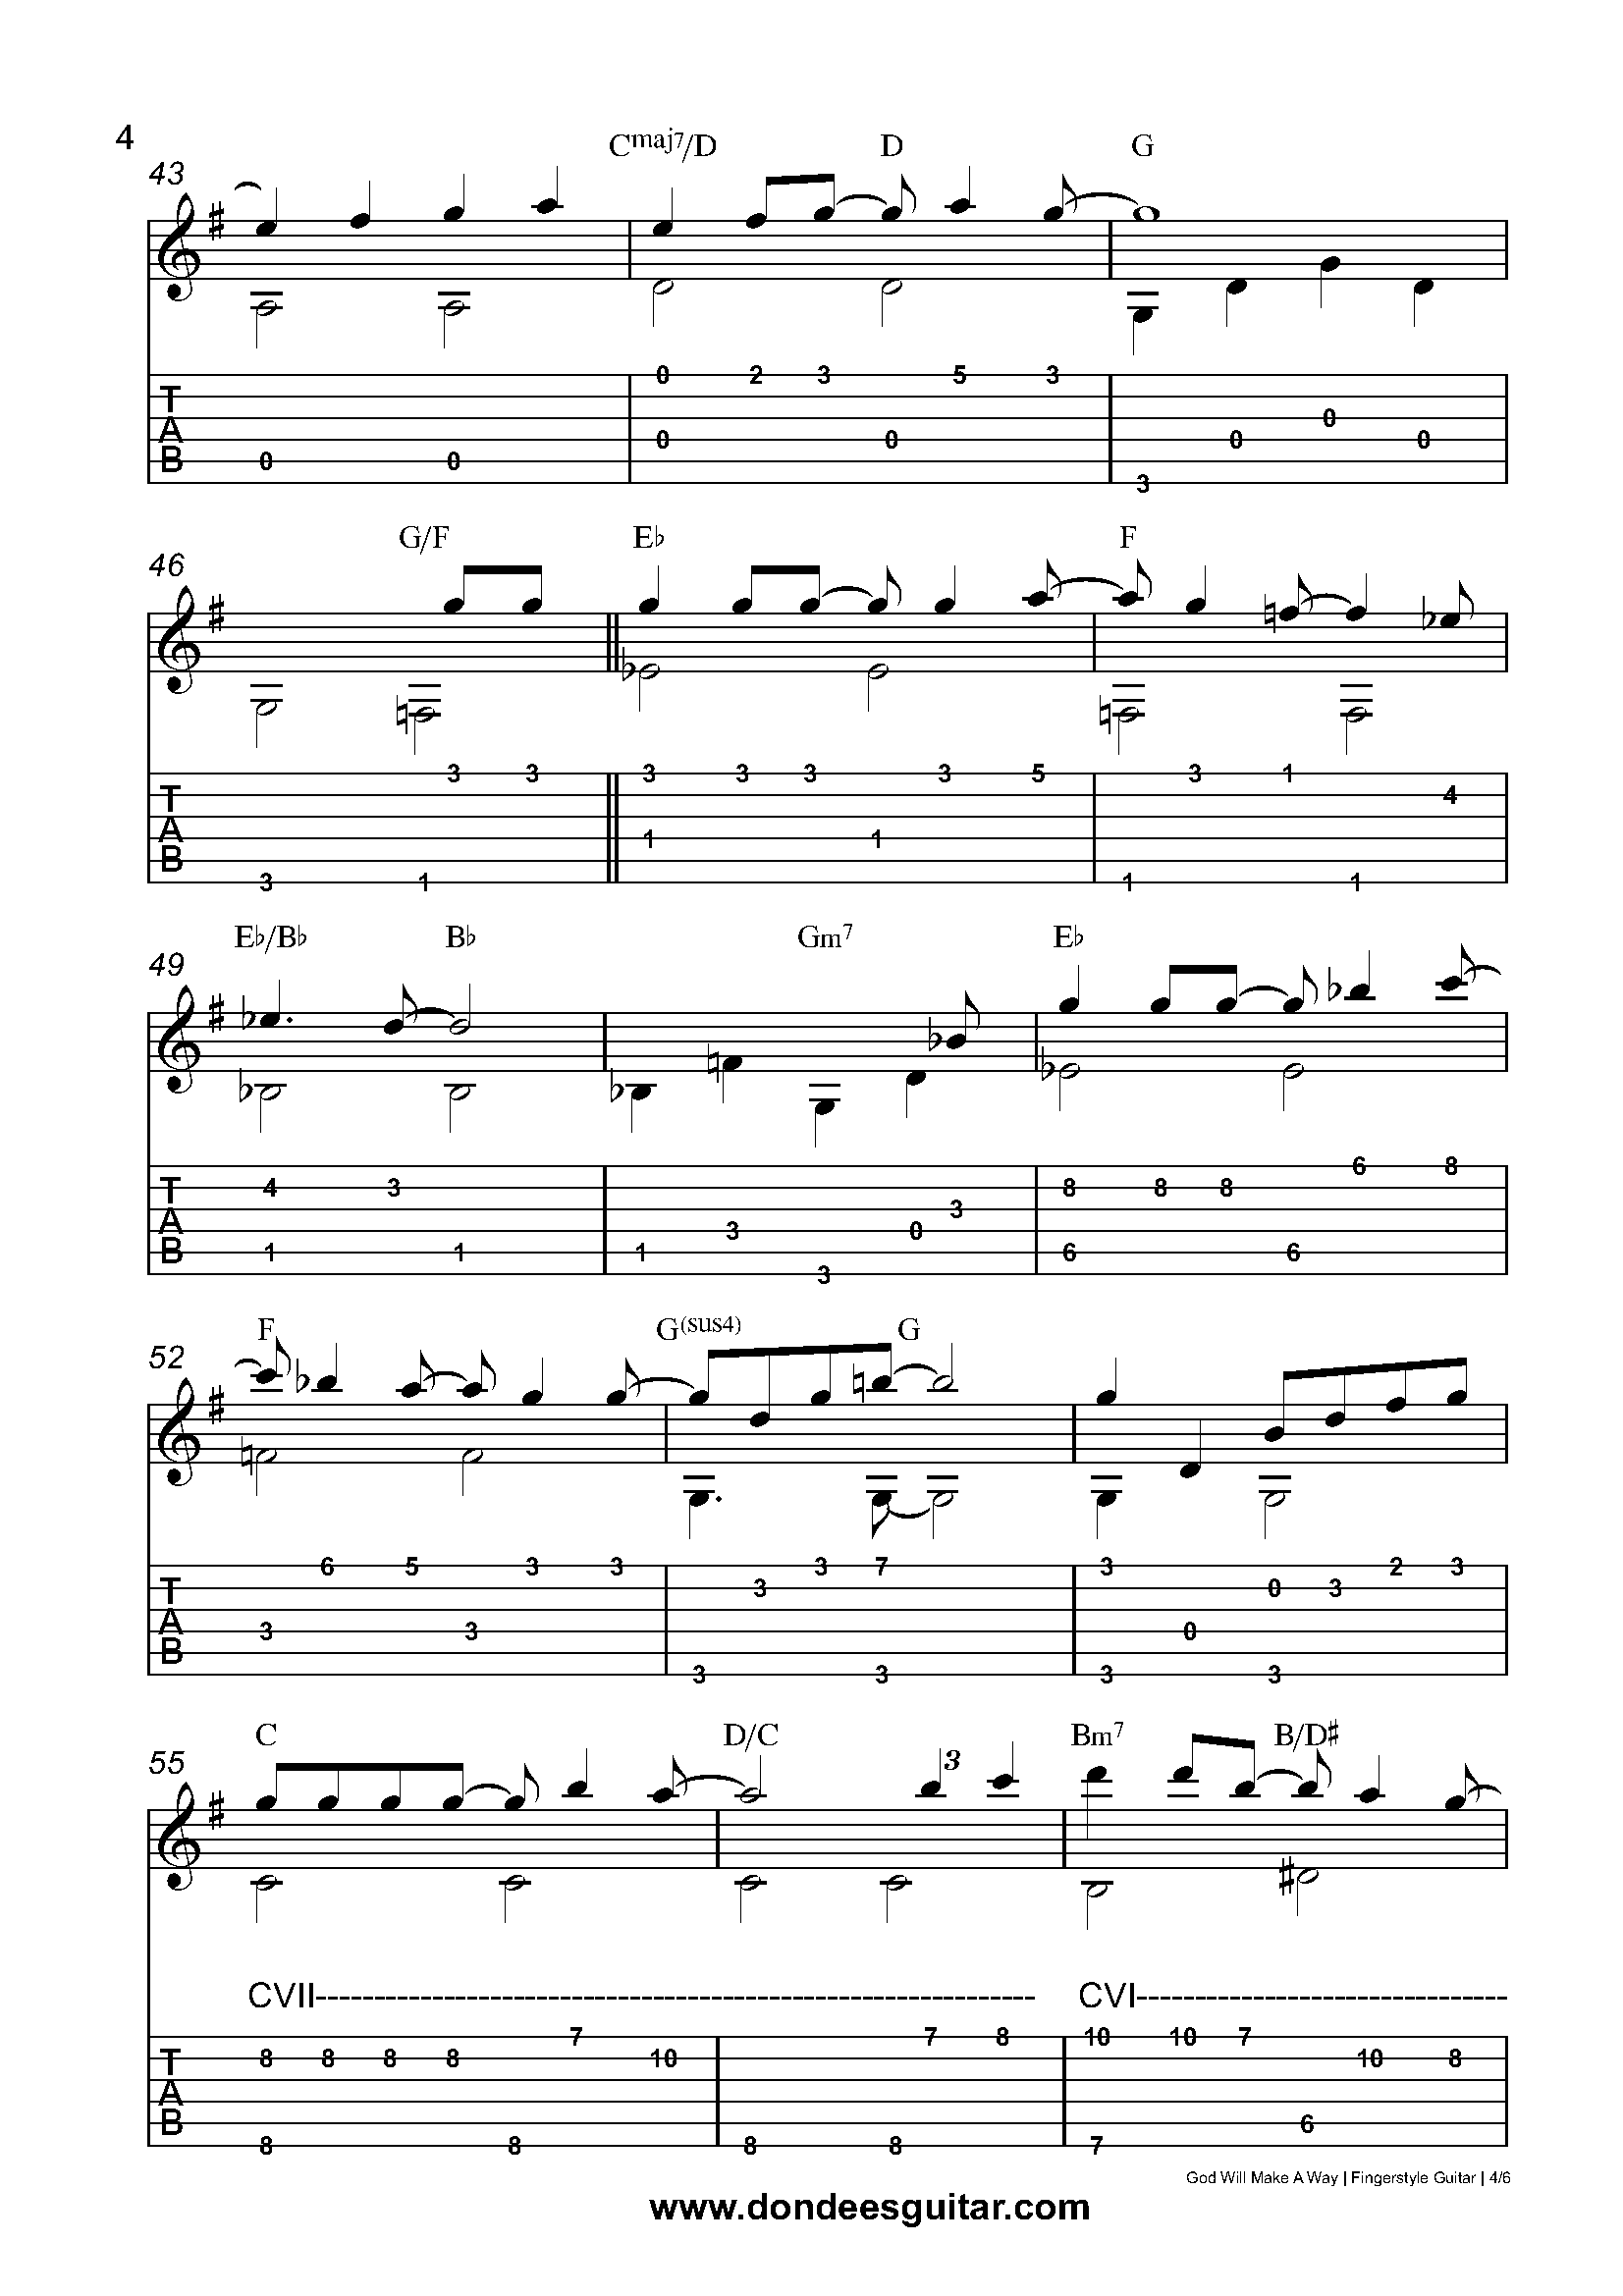 God Will Make A Way Fingerstyle Tabs